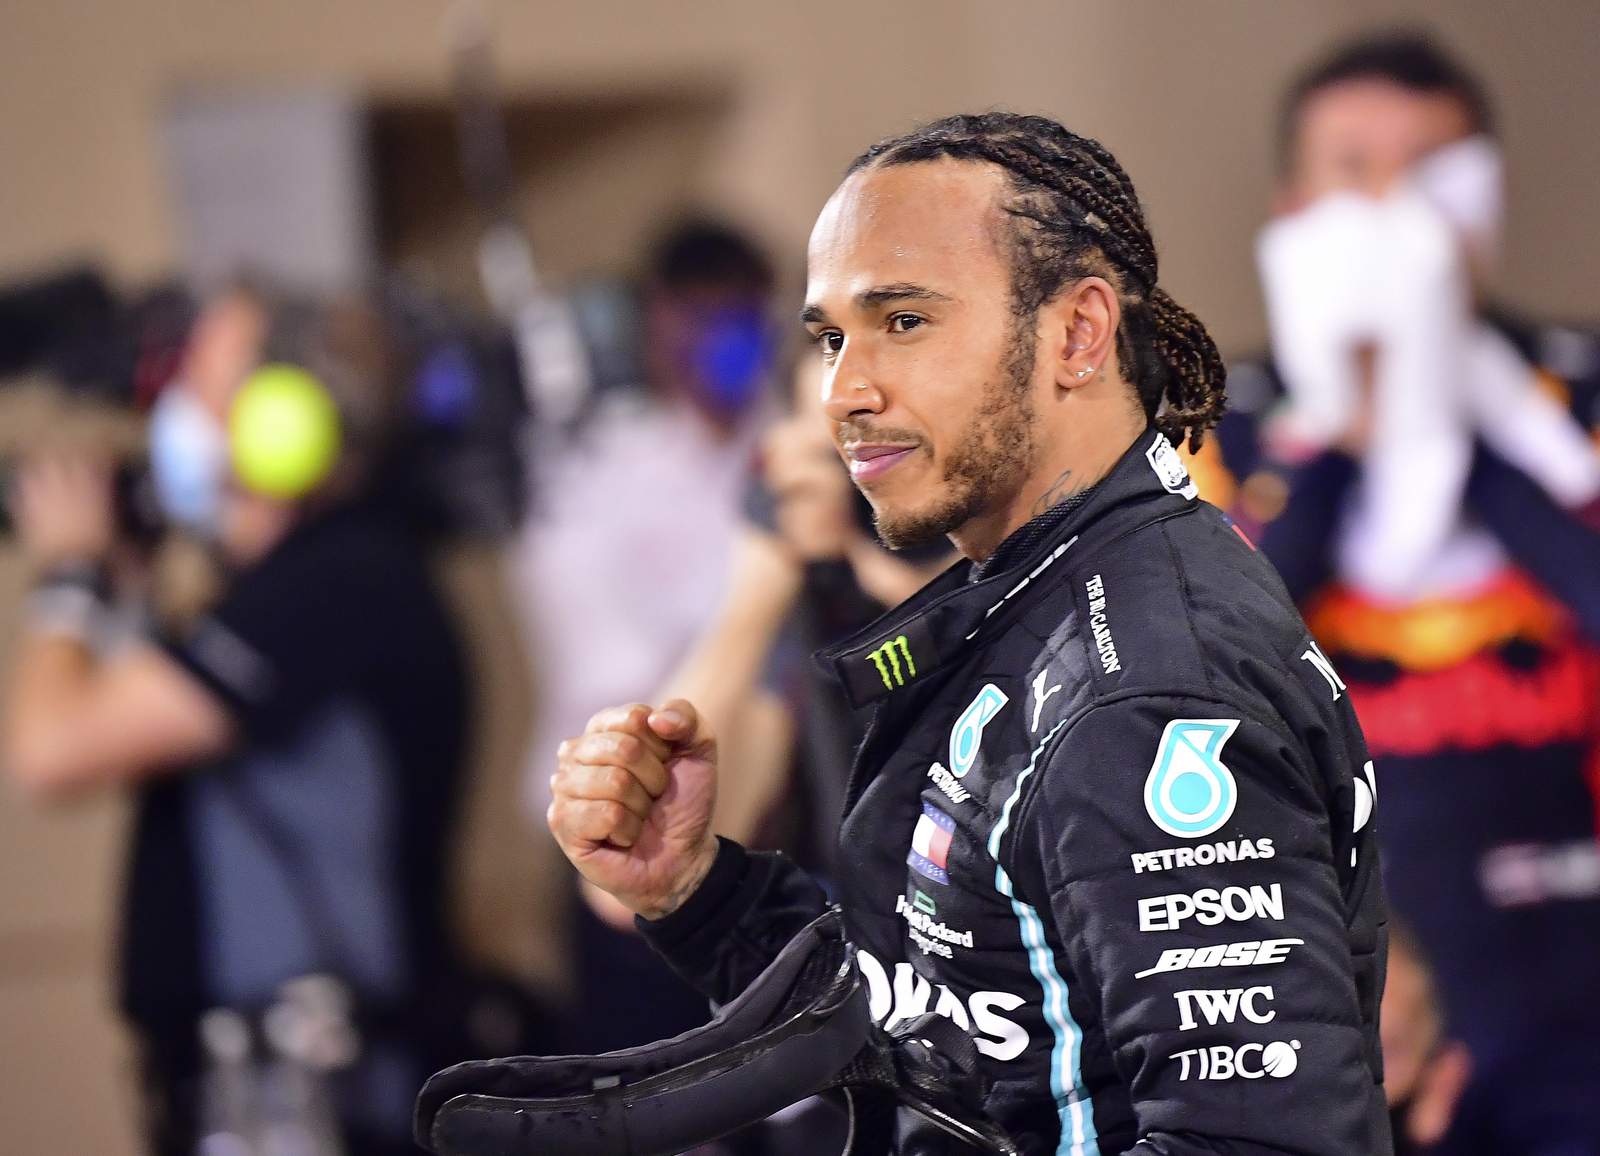 Speedy Sir: Lewis Hamilton knighted in year-end royal honors